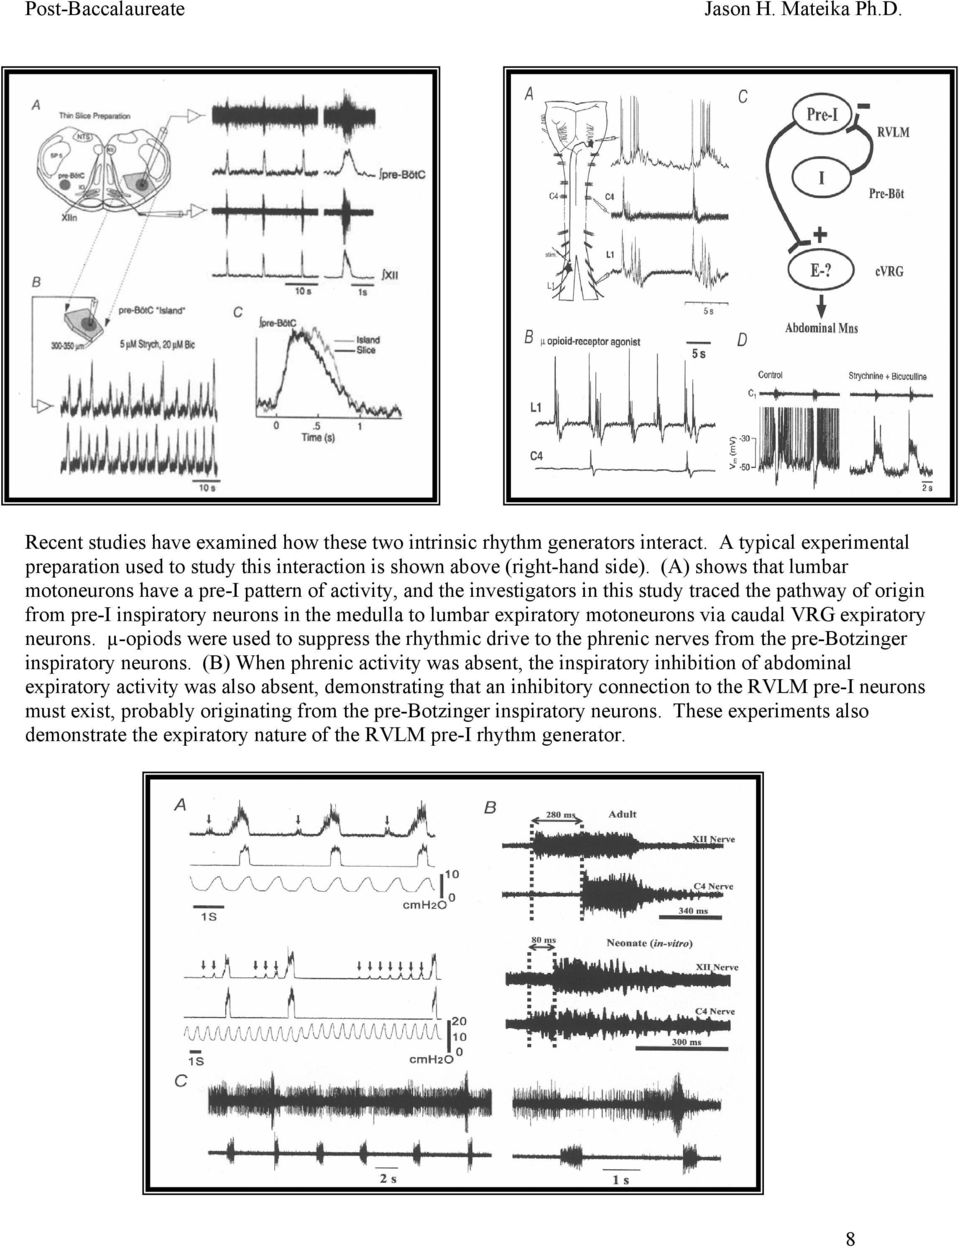 motoneurons via caudal VRG expiratory neurons. µ-opiods were used to suppress the rhythmic drive to the phrenic nerves from the pre-botzinger inspiratory neurons.